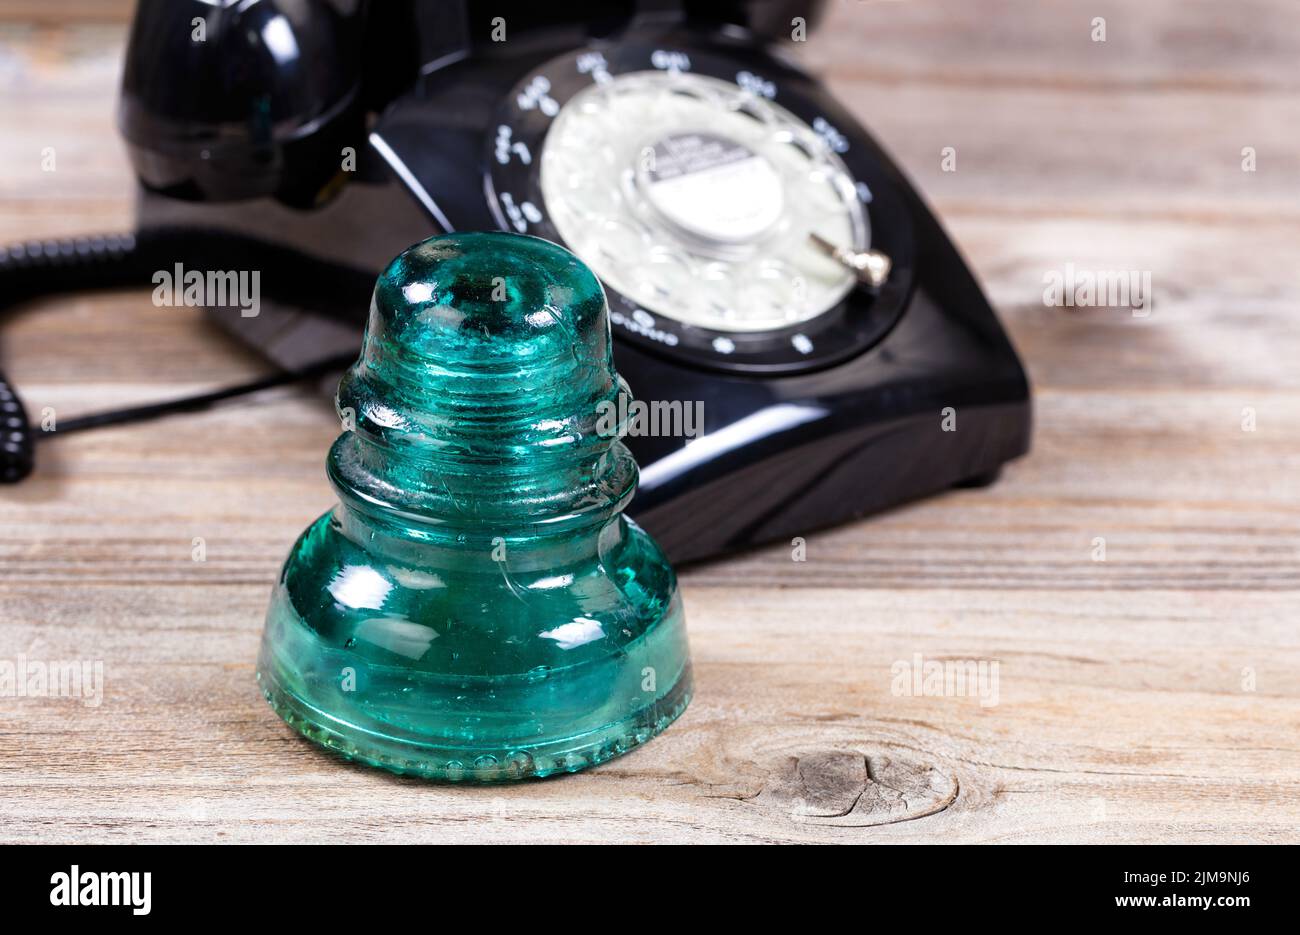 Antique glass insulator and rotary dial phone on rustic wooden boards Stock Photo